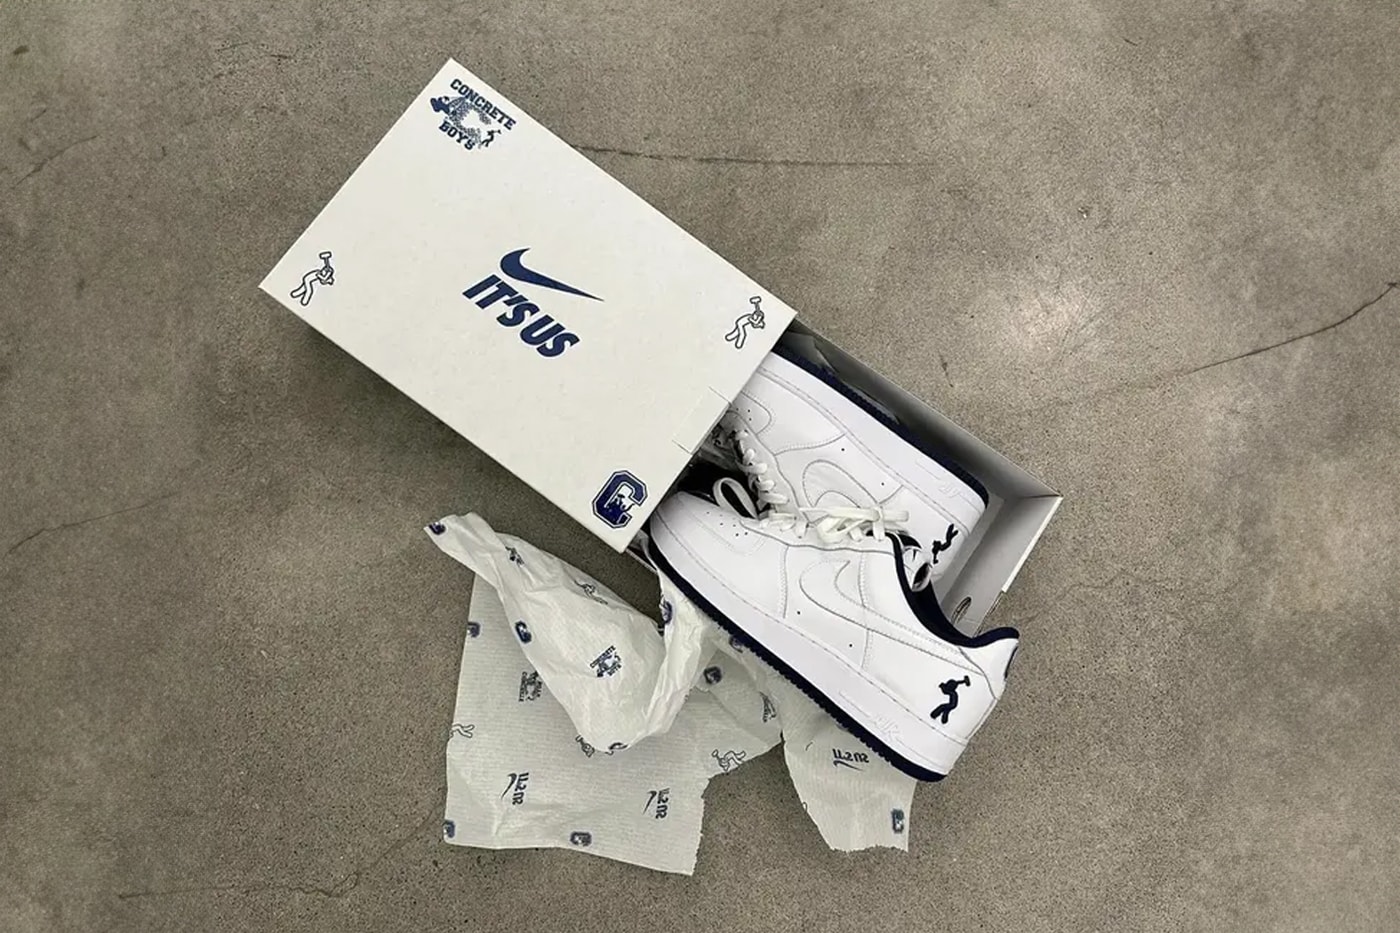 Lil Yachty Reveals Exclusive Friends-And-Family Nike Air Force 1s rapper drake instagram close friends navy accents white insole concrete boys logo